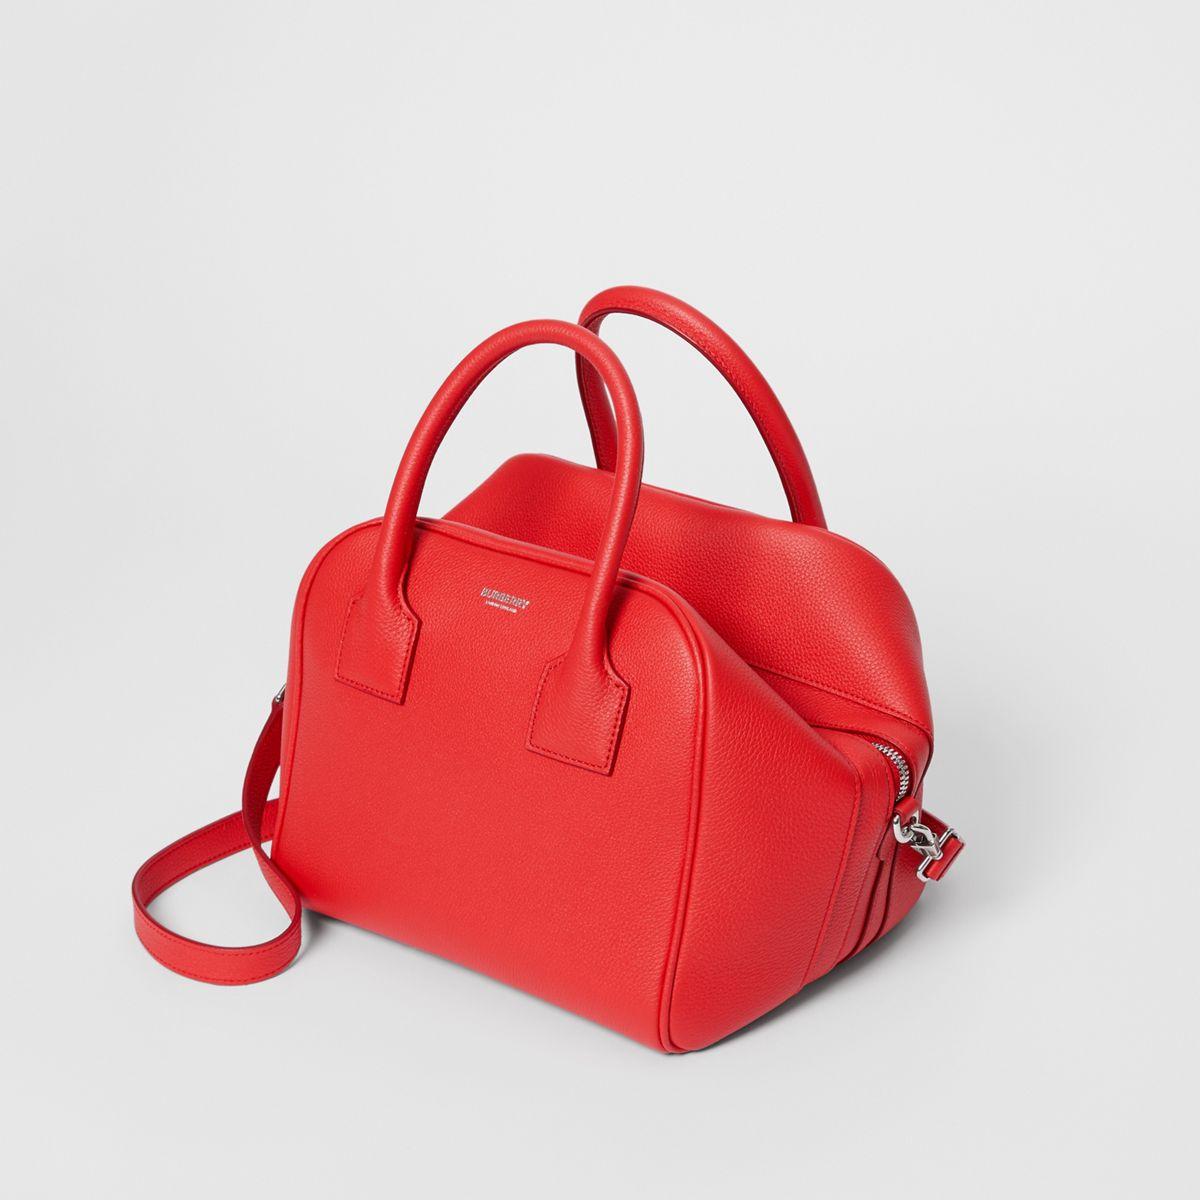 Burberry Small Leather Cube Bag in Bright Red (Red) - Lyst